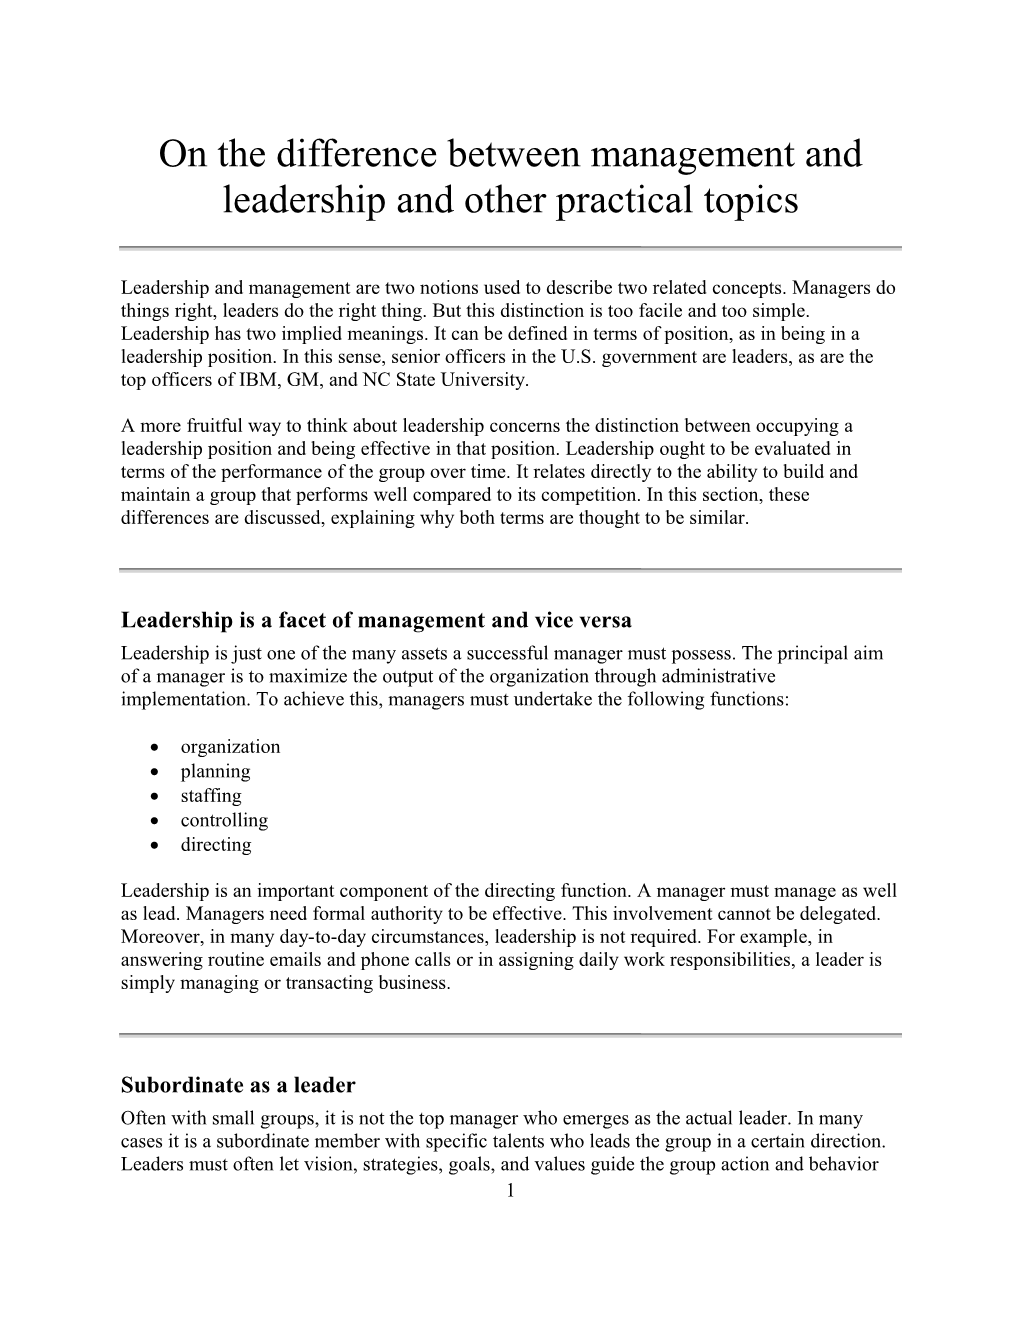 On the Difference Between Management and Leadership and Other Practical Topics